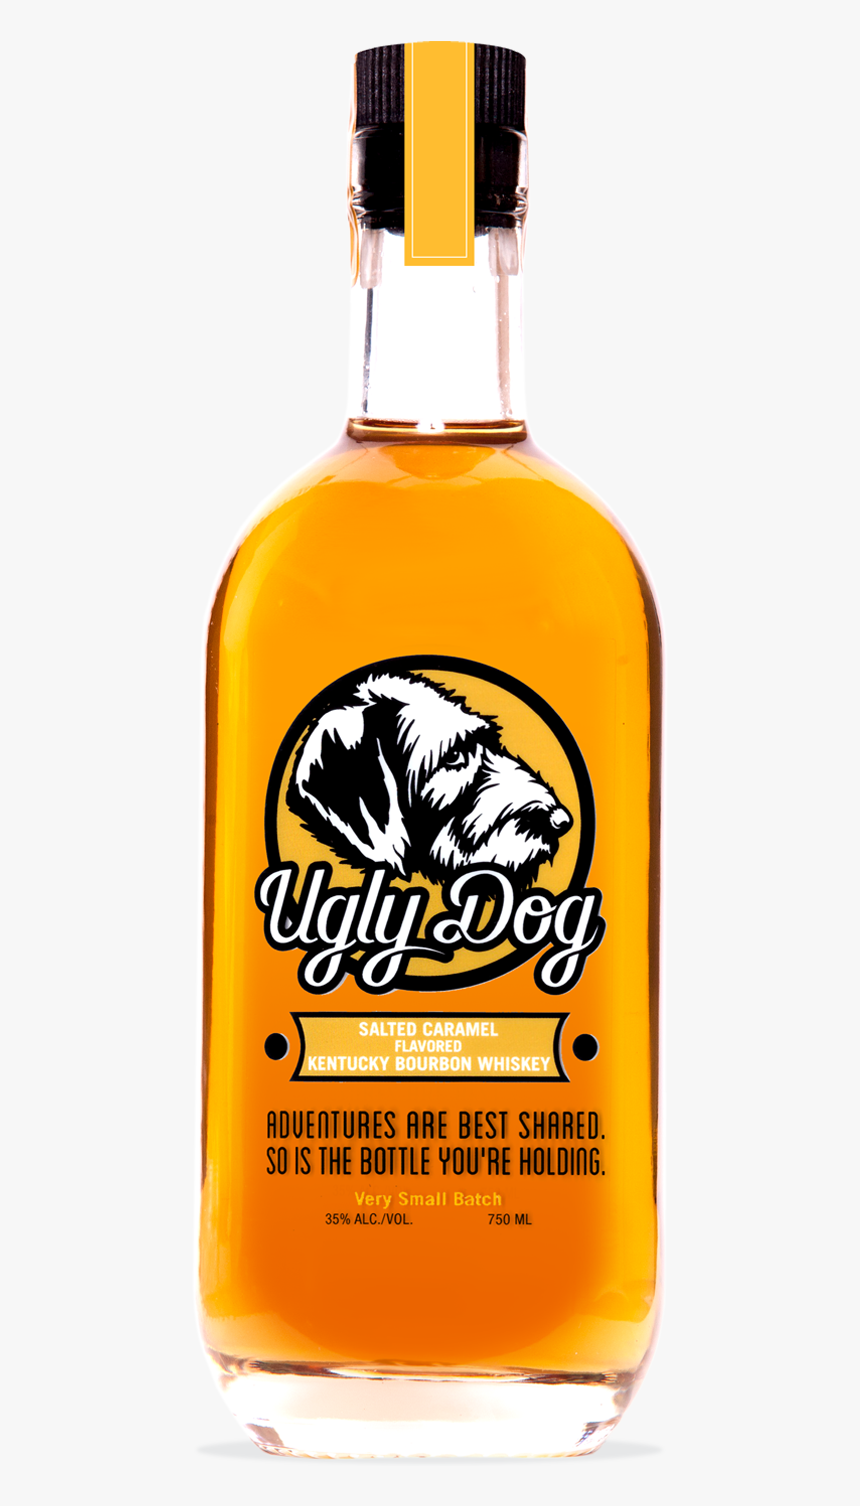 Salted-carmel - Ugly Dog Peanut Butter Whiskey, HD Png Download, Free Download